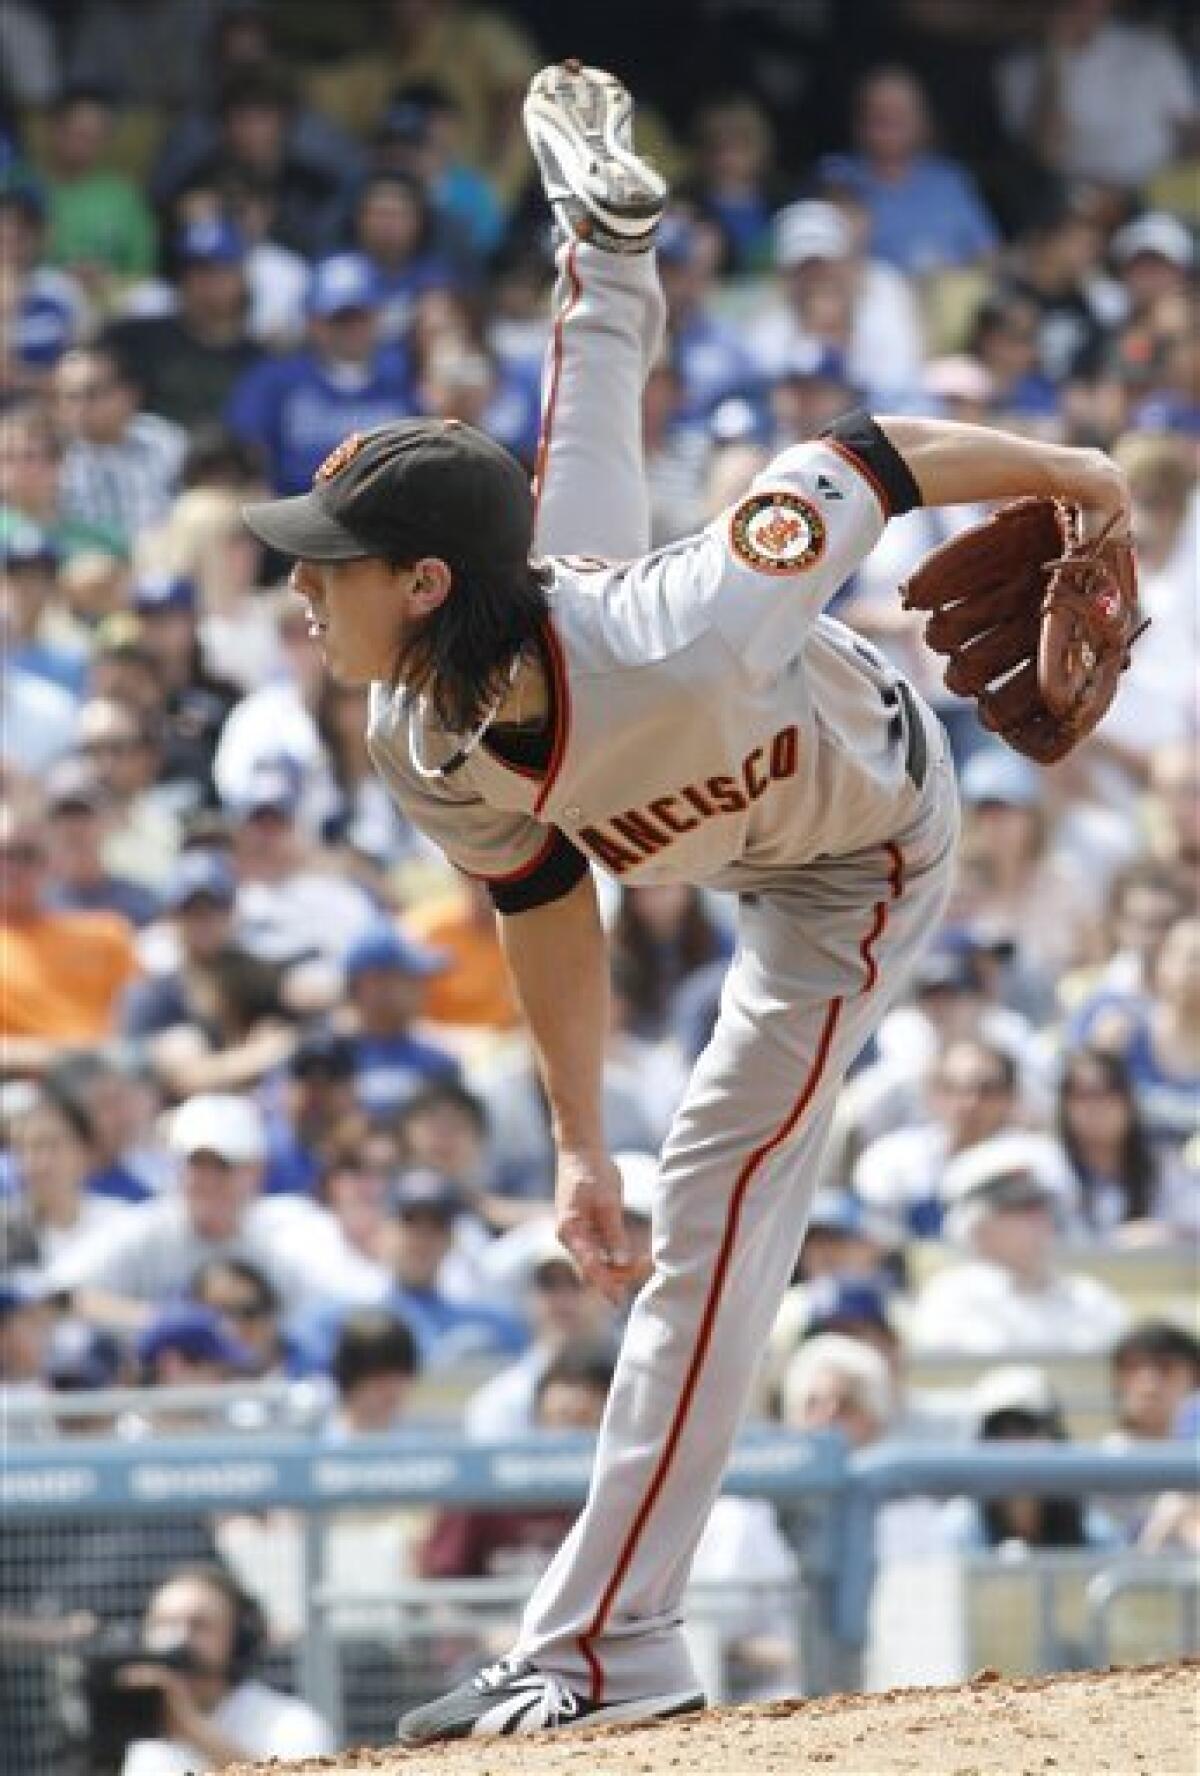 Dodgers Rumors: Tim Lincecum could be an option